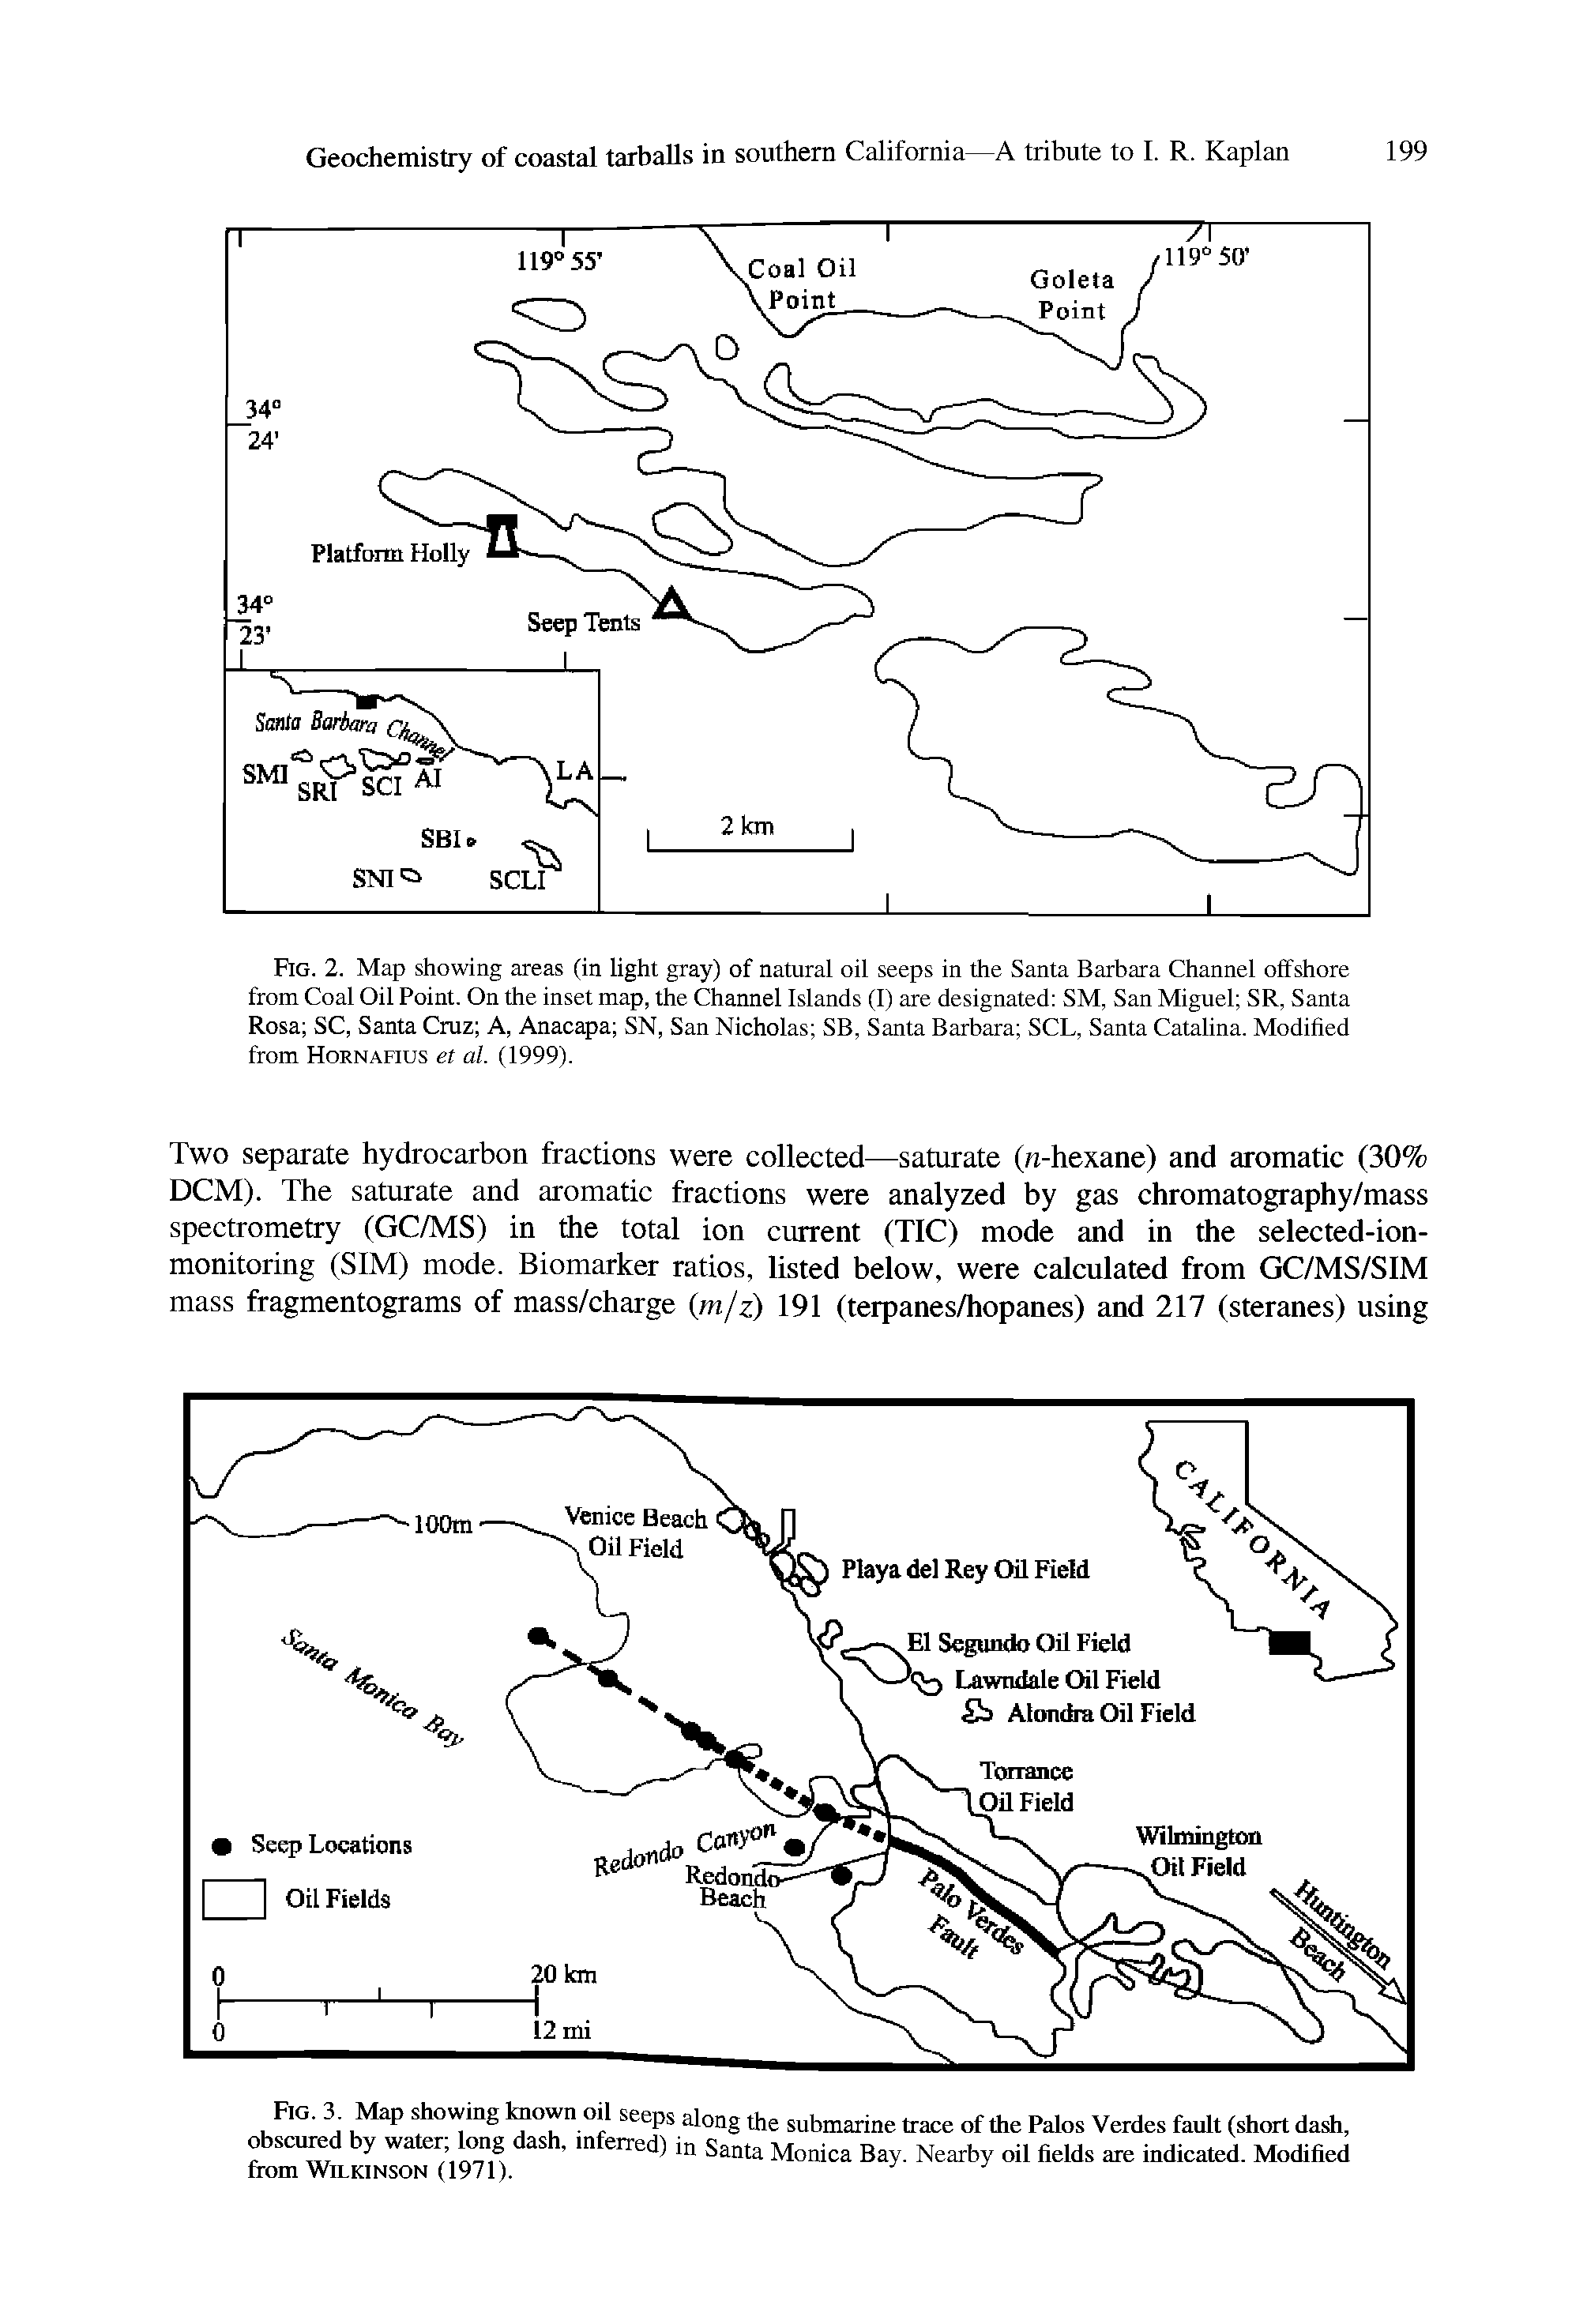 Fig. 2. Map showing areas (in light gray) of natural oil seeps in the Santa Barbara Channel offshore from Coal Oil Point. On the inset map, the Channel Islands (1) are designated SM, San Miguel SR, Santa Rosa SC, Santa Cruz A, Anacapa SN, San Nicholas SB, Santa Barbara SCL, Santa Catalina. Modified from Hornahus et al. (1999).